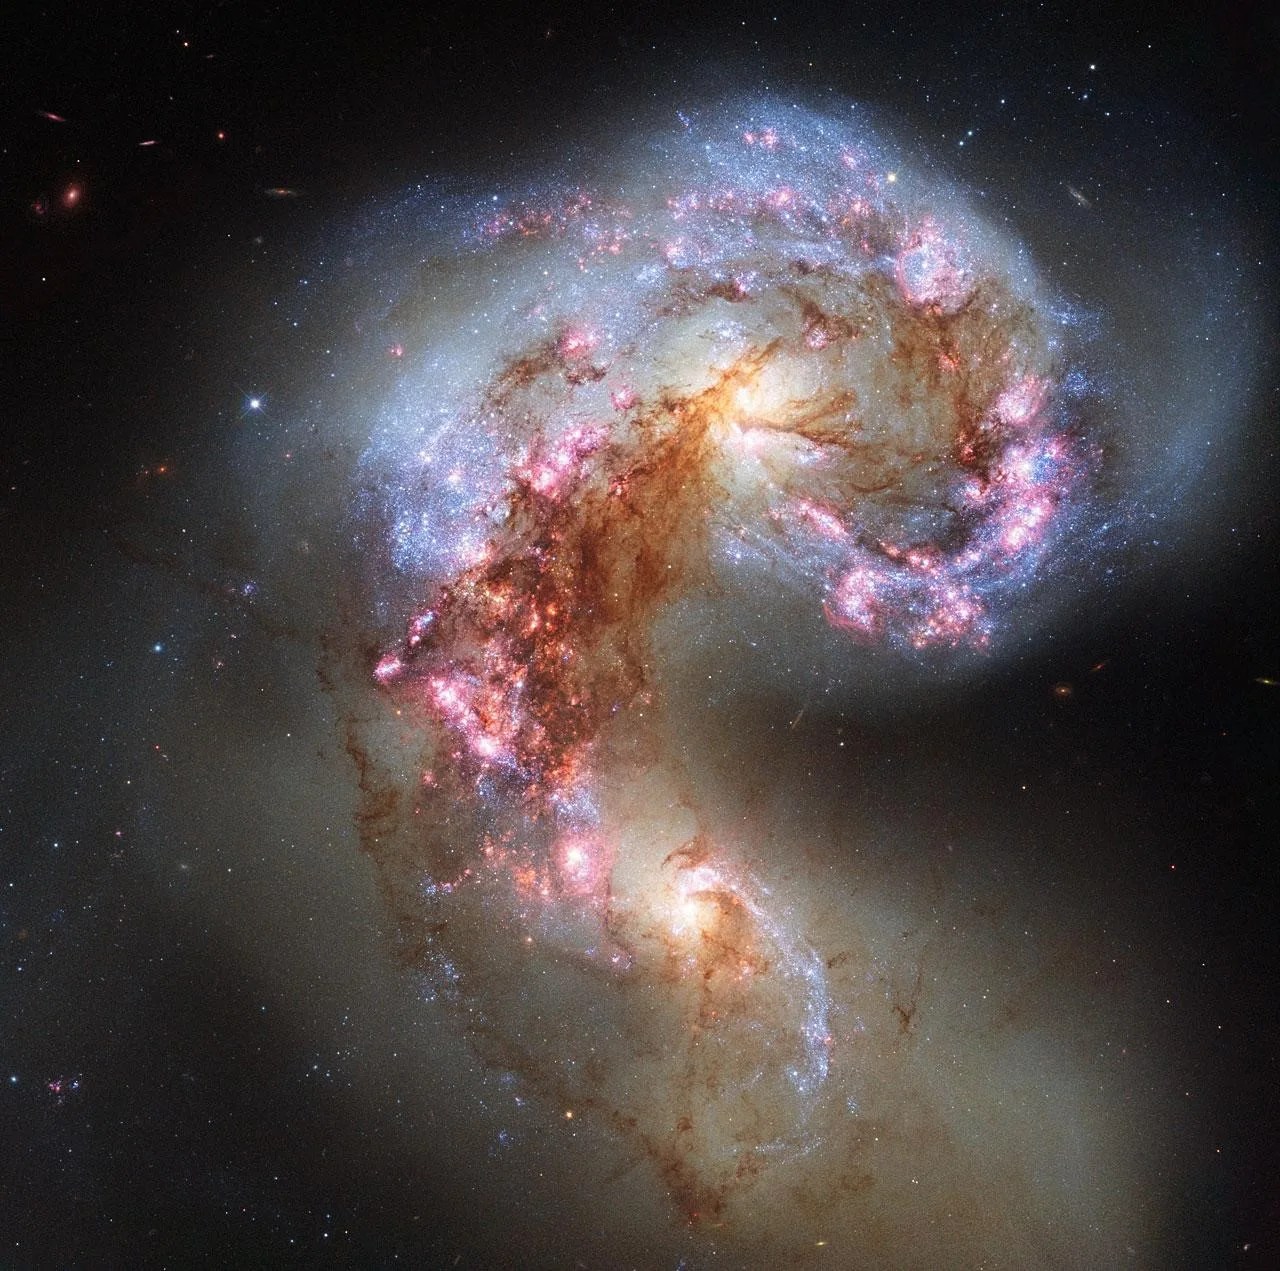 Two galaxies merge, a larger one at the top of the image and a smaller one below it. Both galaxies glow with a yellowish center, have rings of pink and bluish-white stars around them, and are connected by a large cloud of dust, brown, red, and pink.